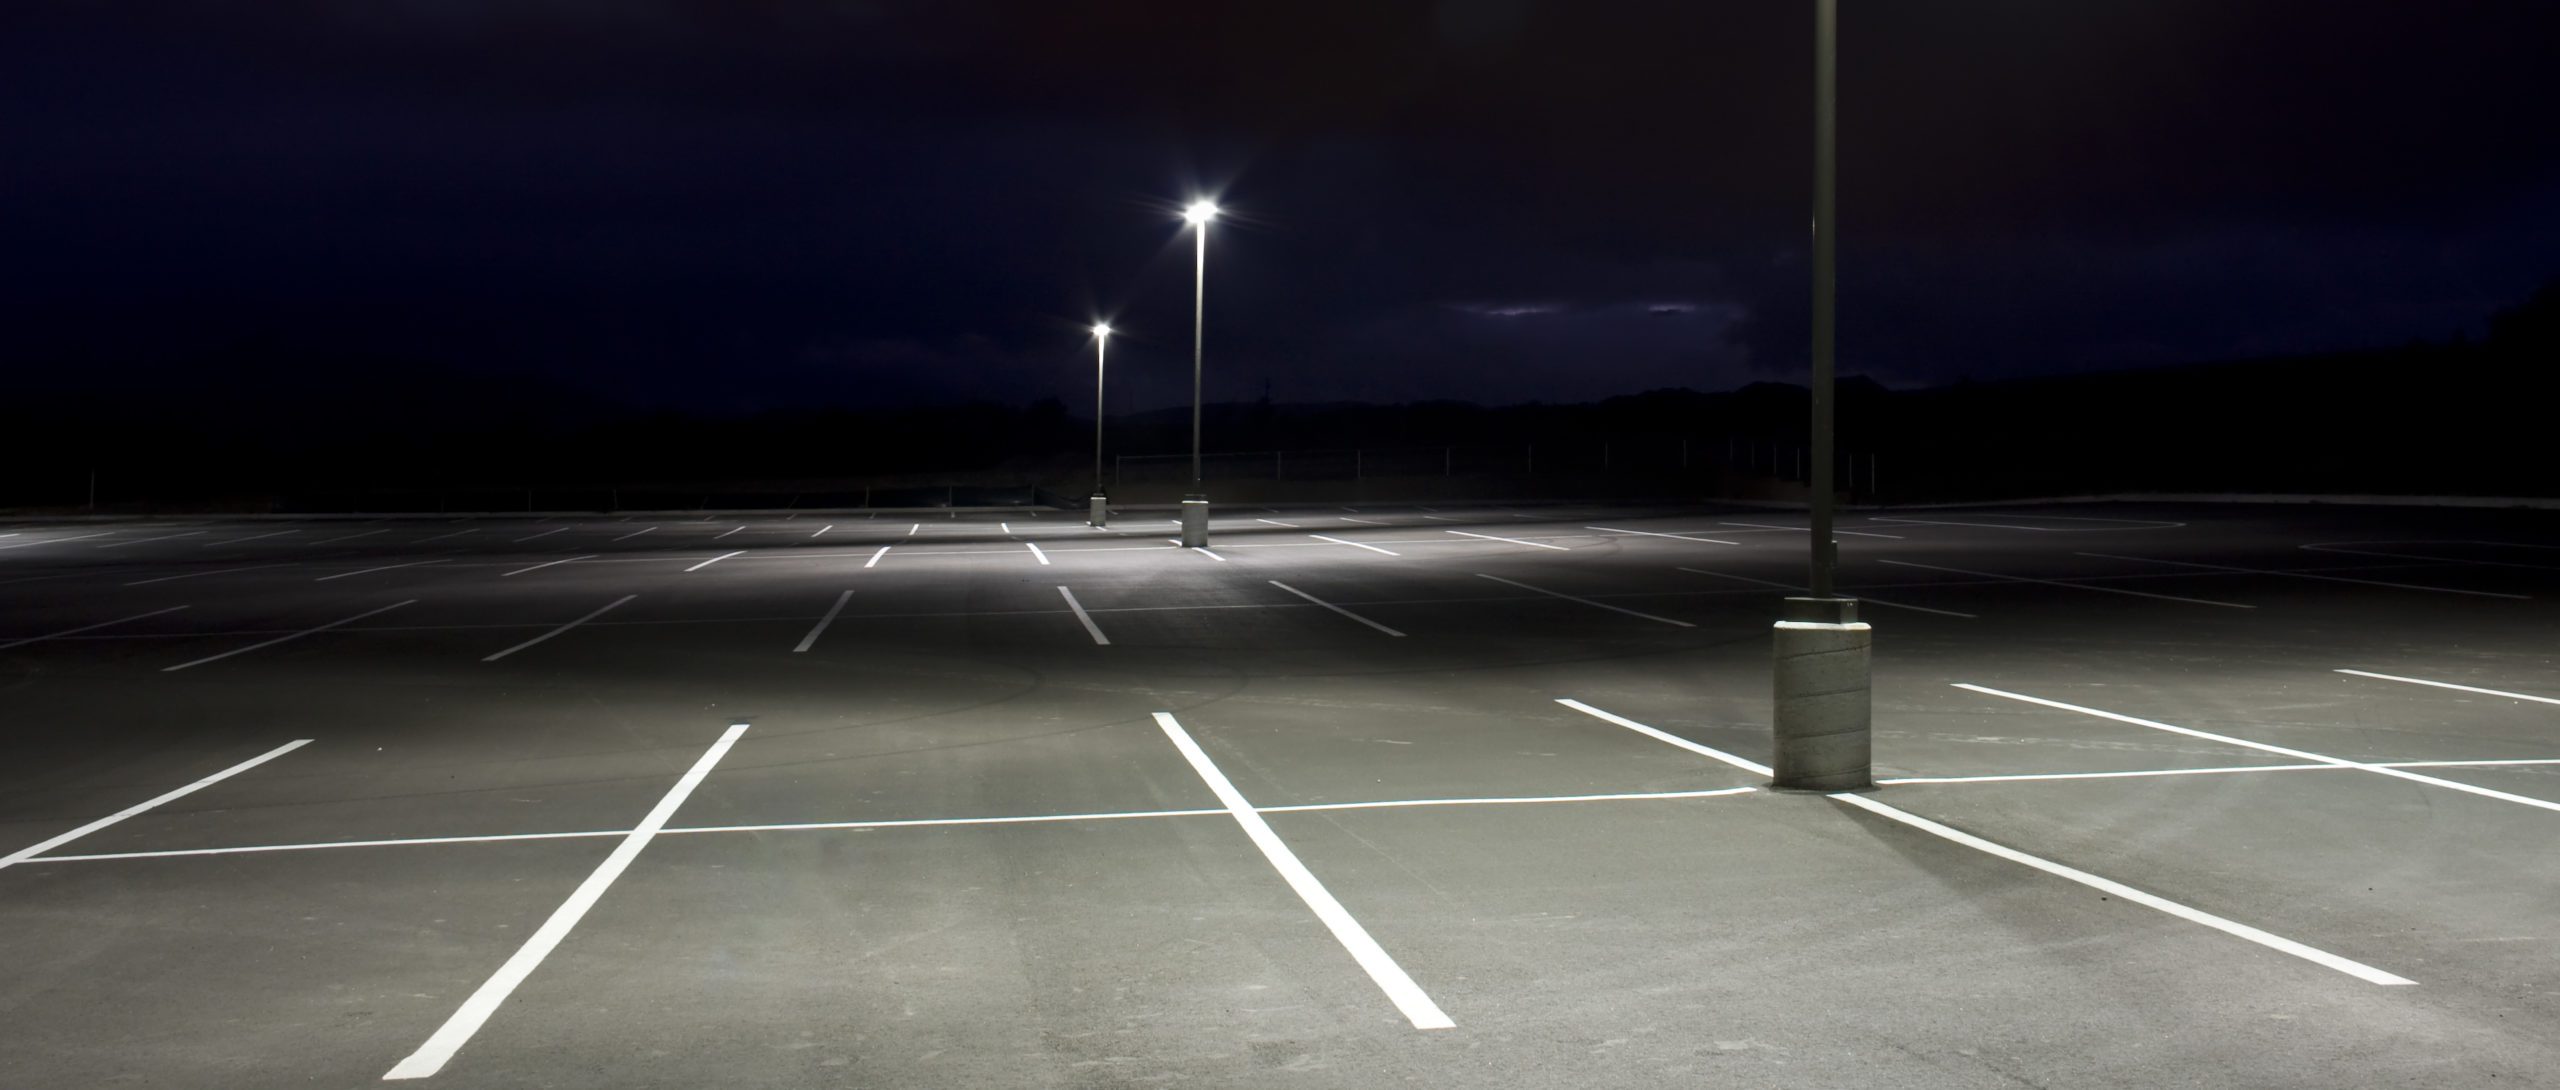 Empty parking lot with white lines